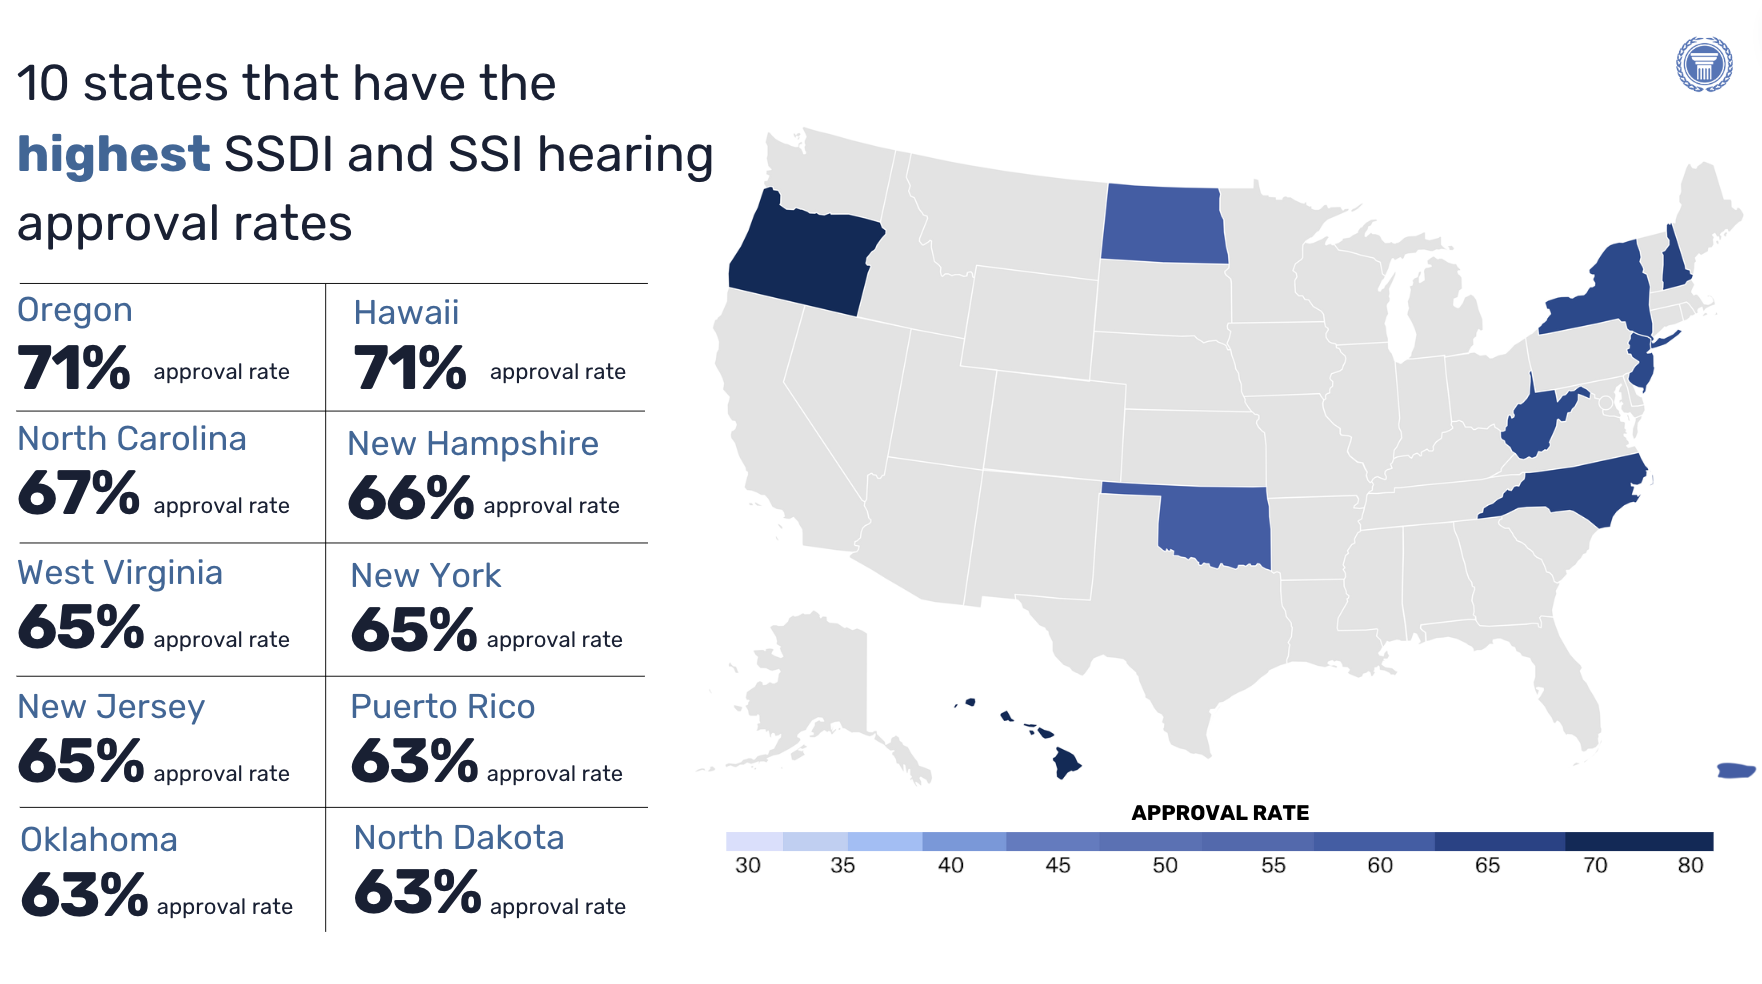 The Top 10 States with the Highest SSDI and SSI Approval Rates